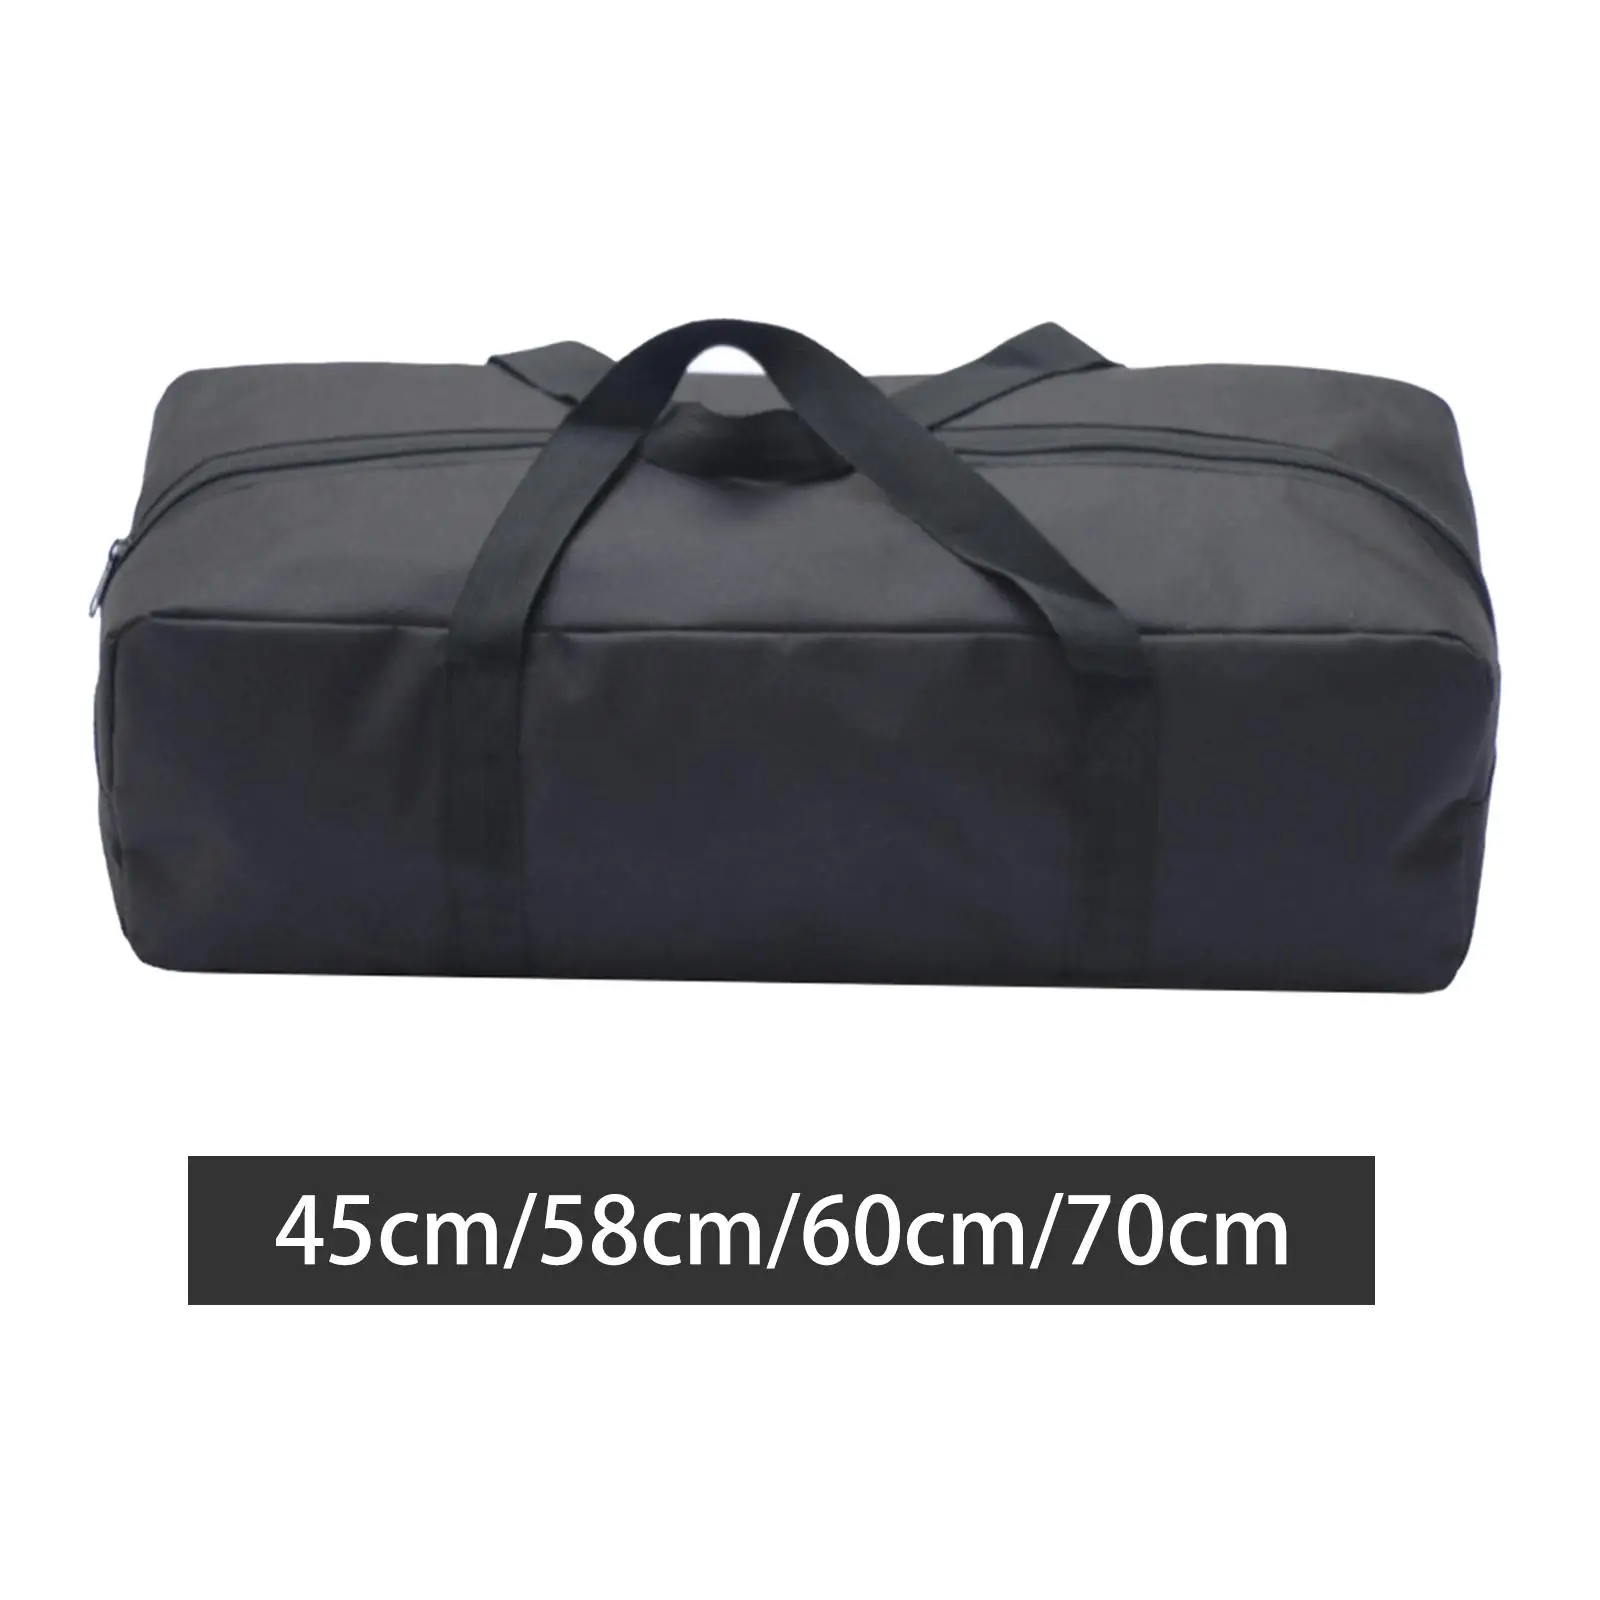 Portable Grill Storage Bag Accs Wear Resistant Oxford Cloth Waterproof for Camp Patio